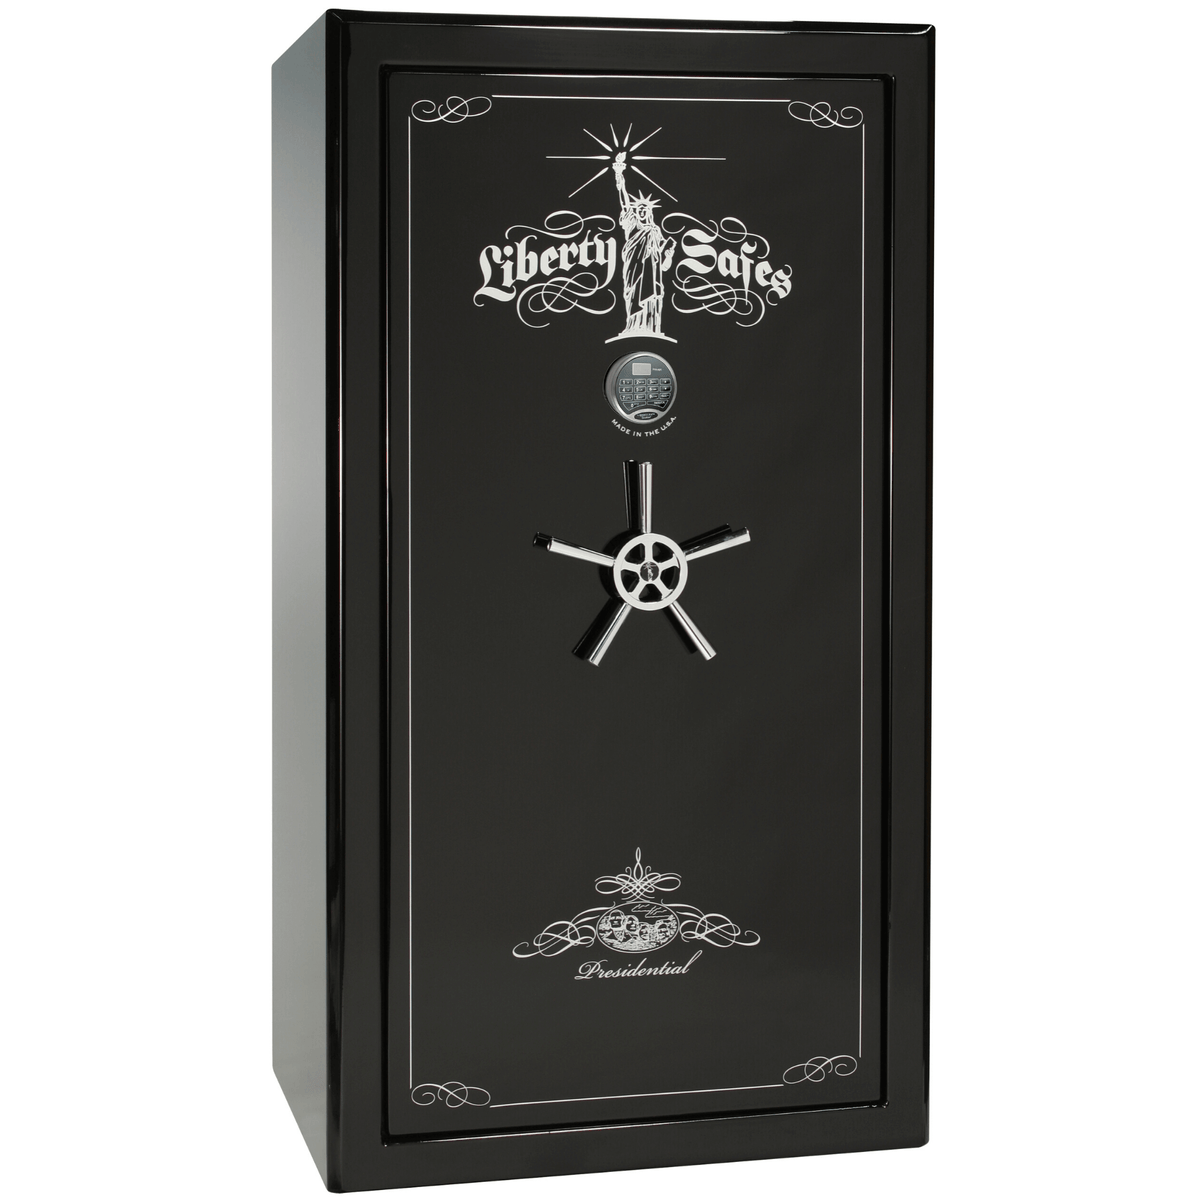 Liberty Safe Presidential 40 in Black Gloss with Chrome Electronic Lock, closed door.